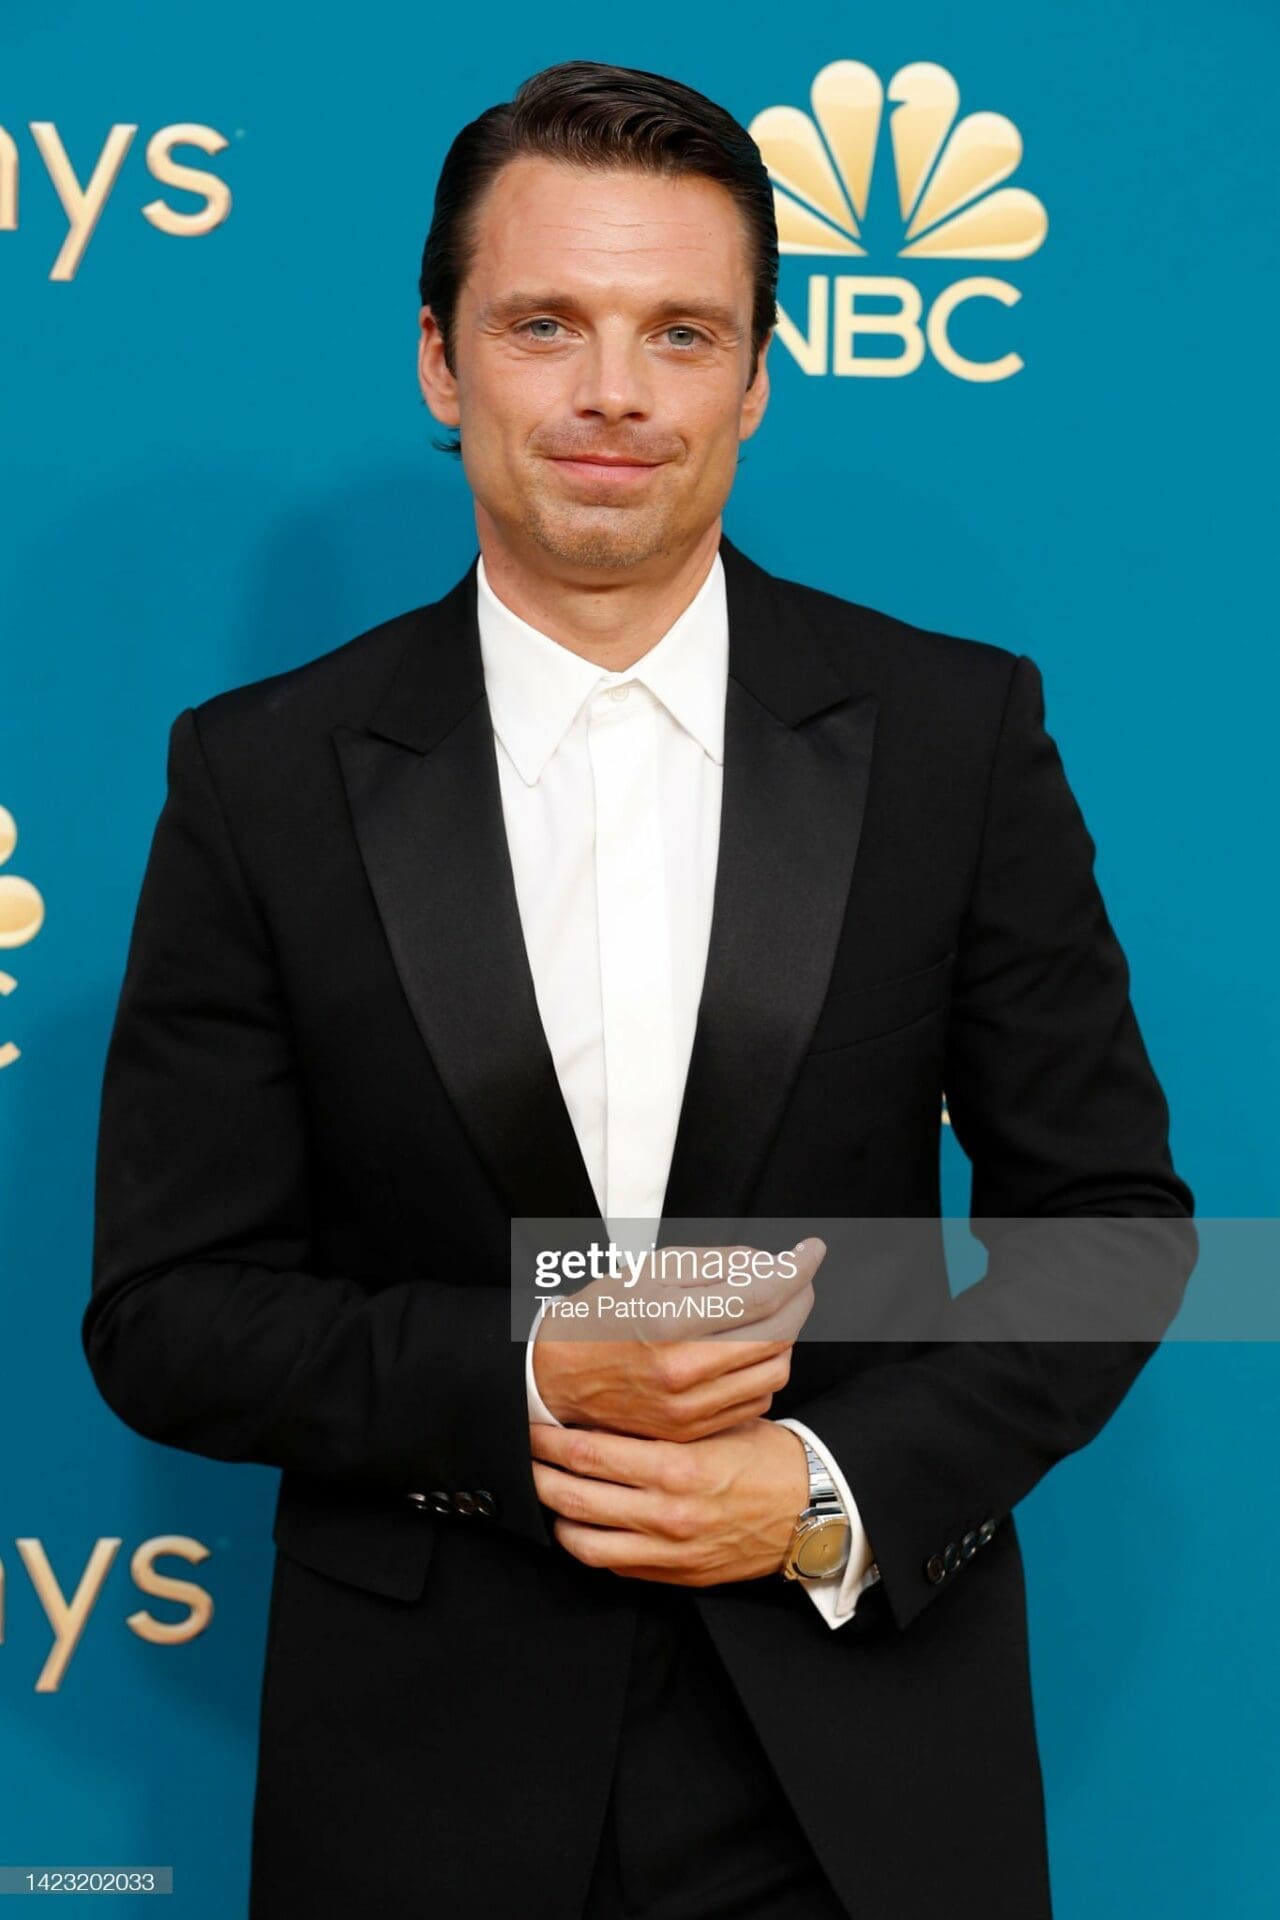 watches at the Emmys